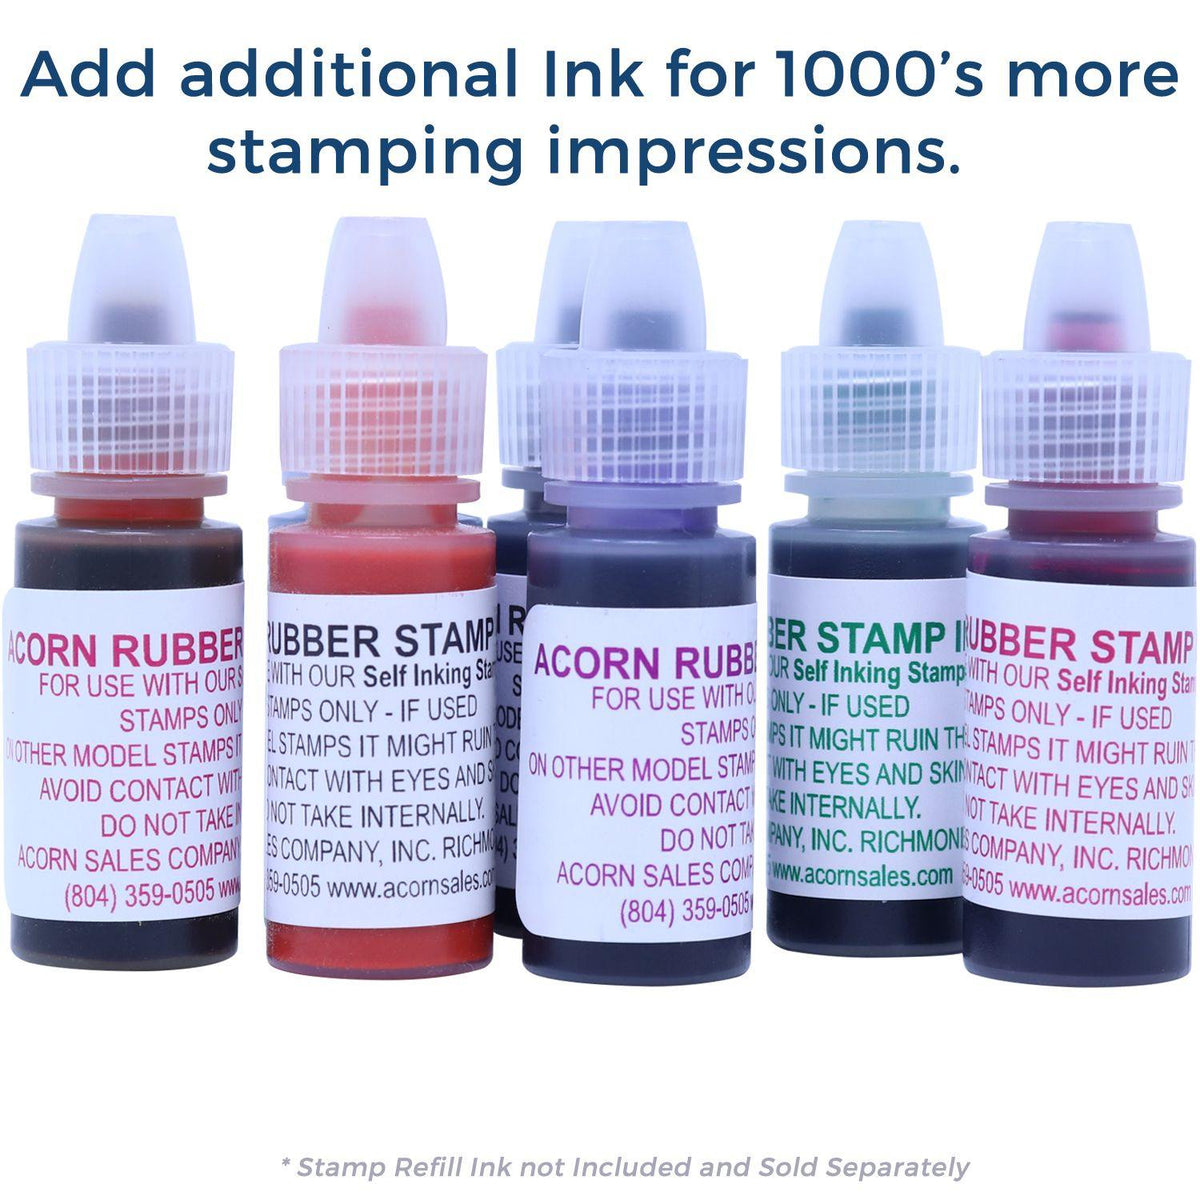 Refill Inks for Large Pre-Inked Narrow Benefits Assigned Stamp Available